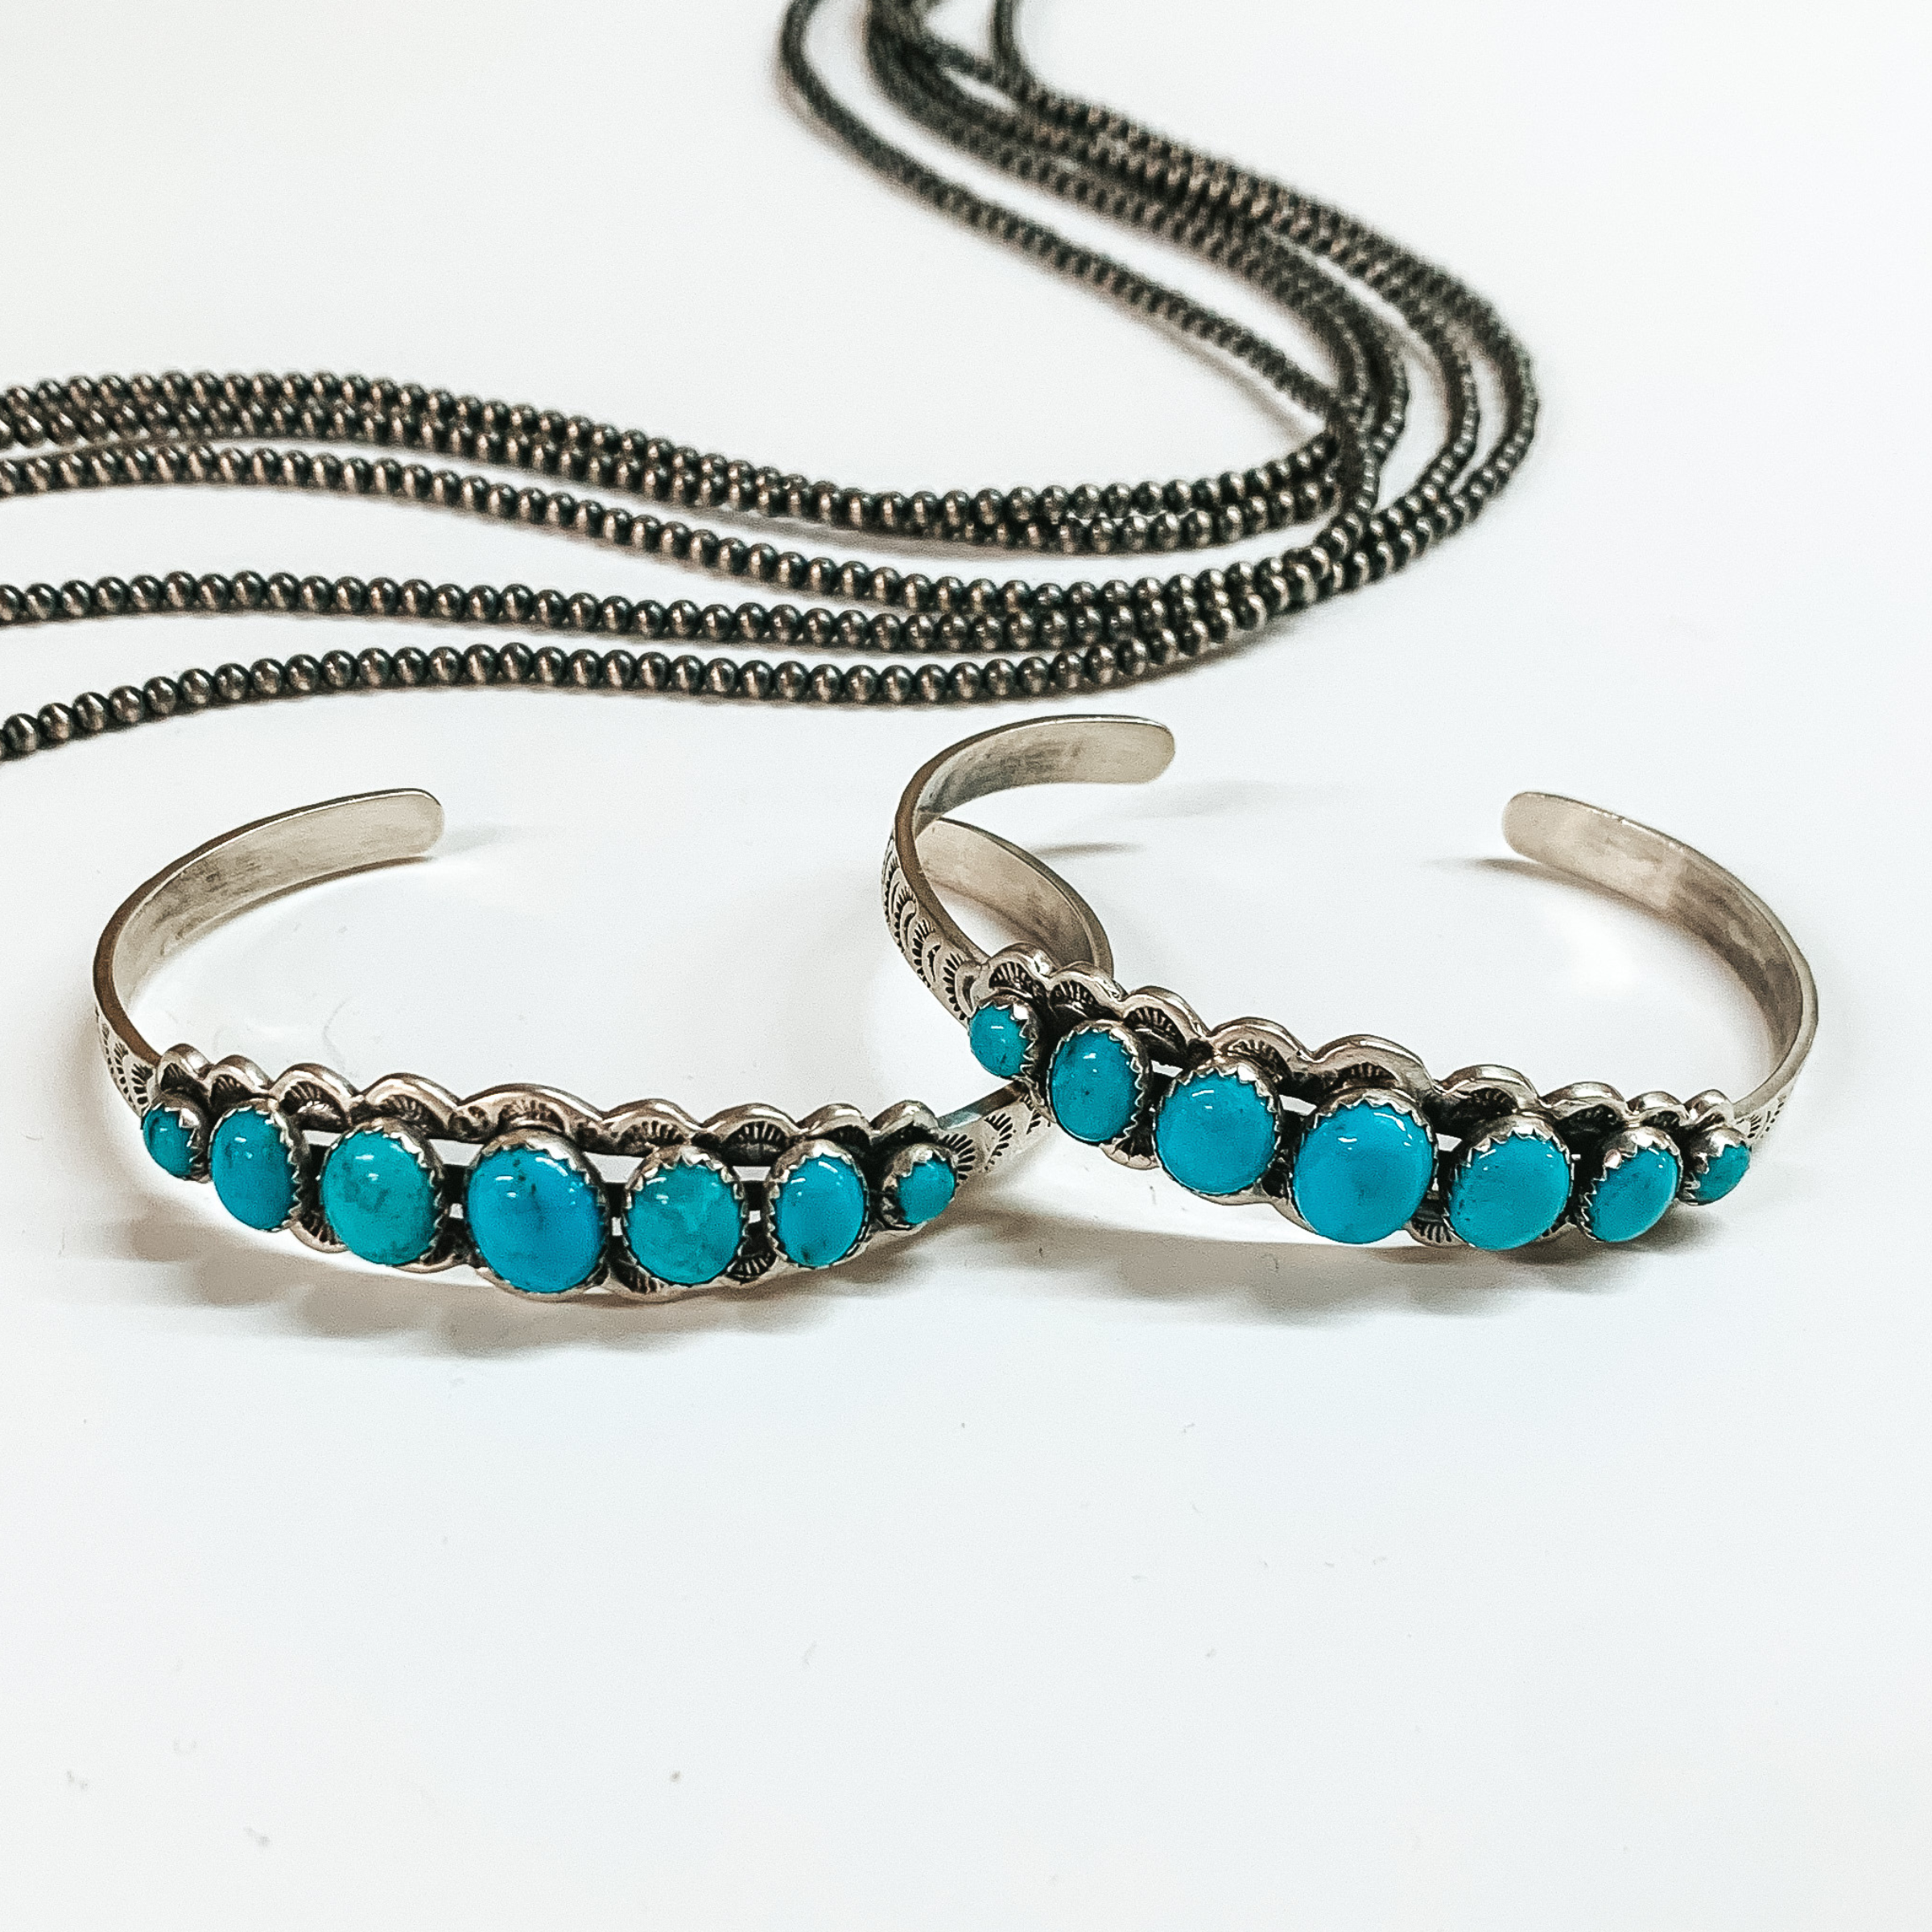 Two silver cuff bracelets with seven turquoise stones. These stones are arranged with the biggest in the middle and then they get gradually smalle on each side. These bracelets are pictured on a white background with silver beads at the top. 